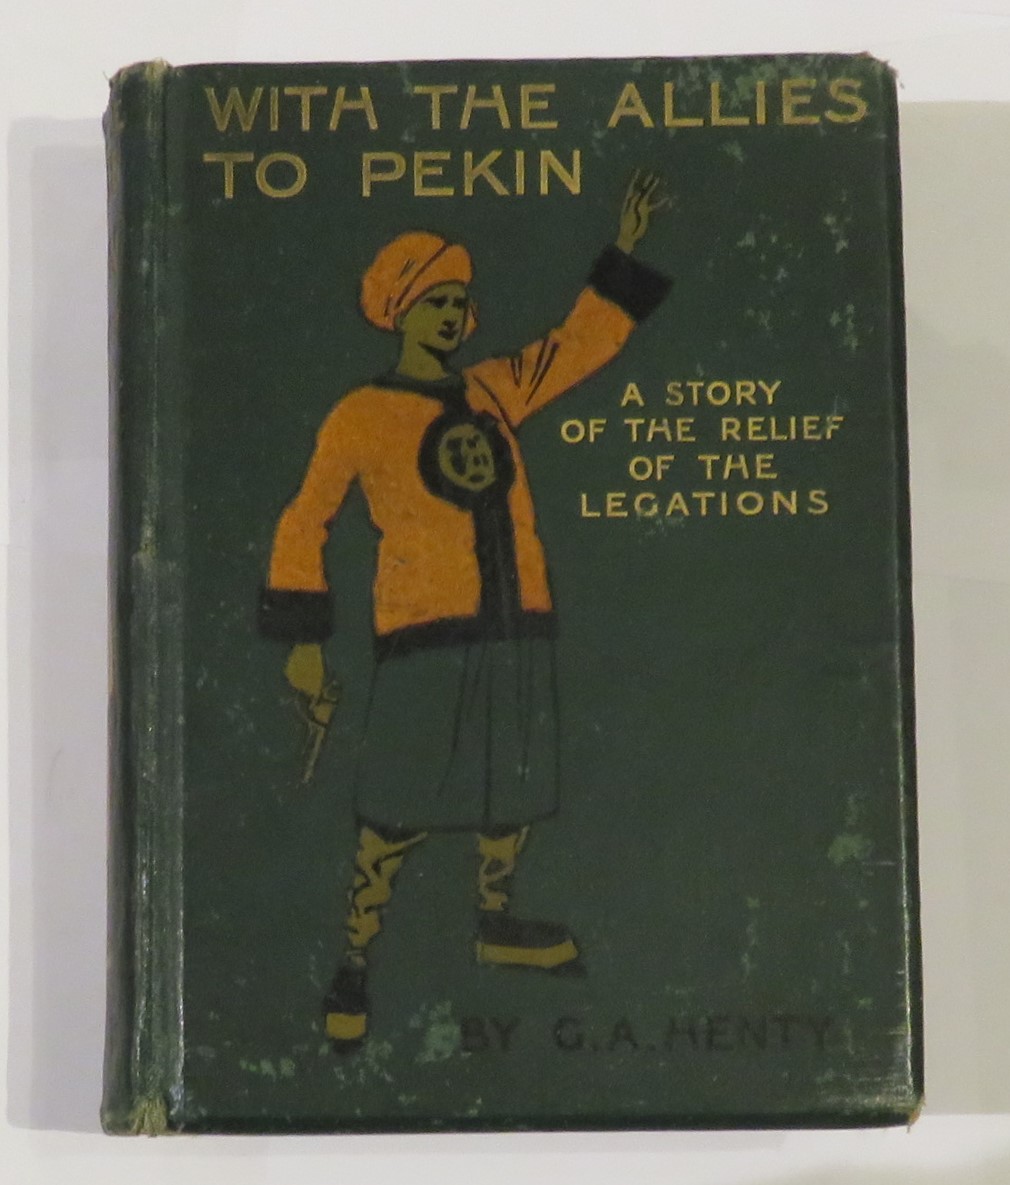 With the Allies to Pekin: A Story of the Relief of the Legations